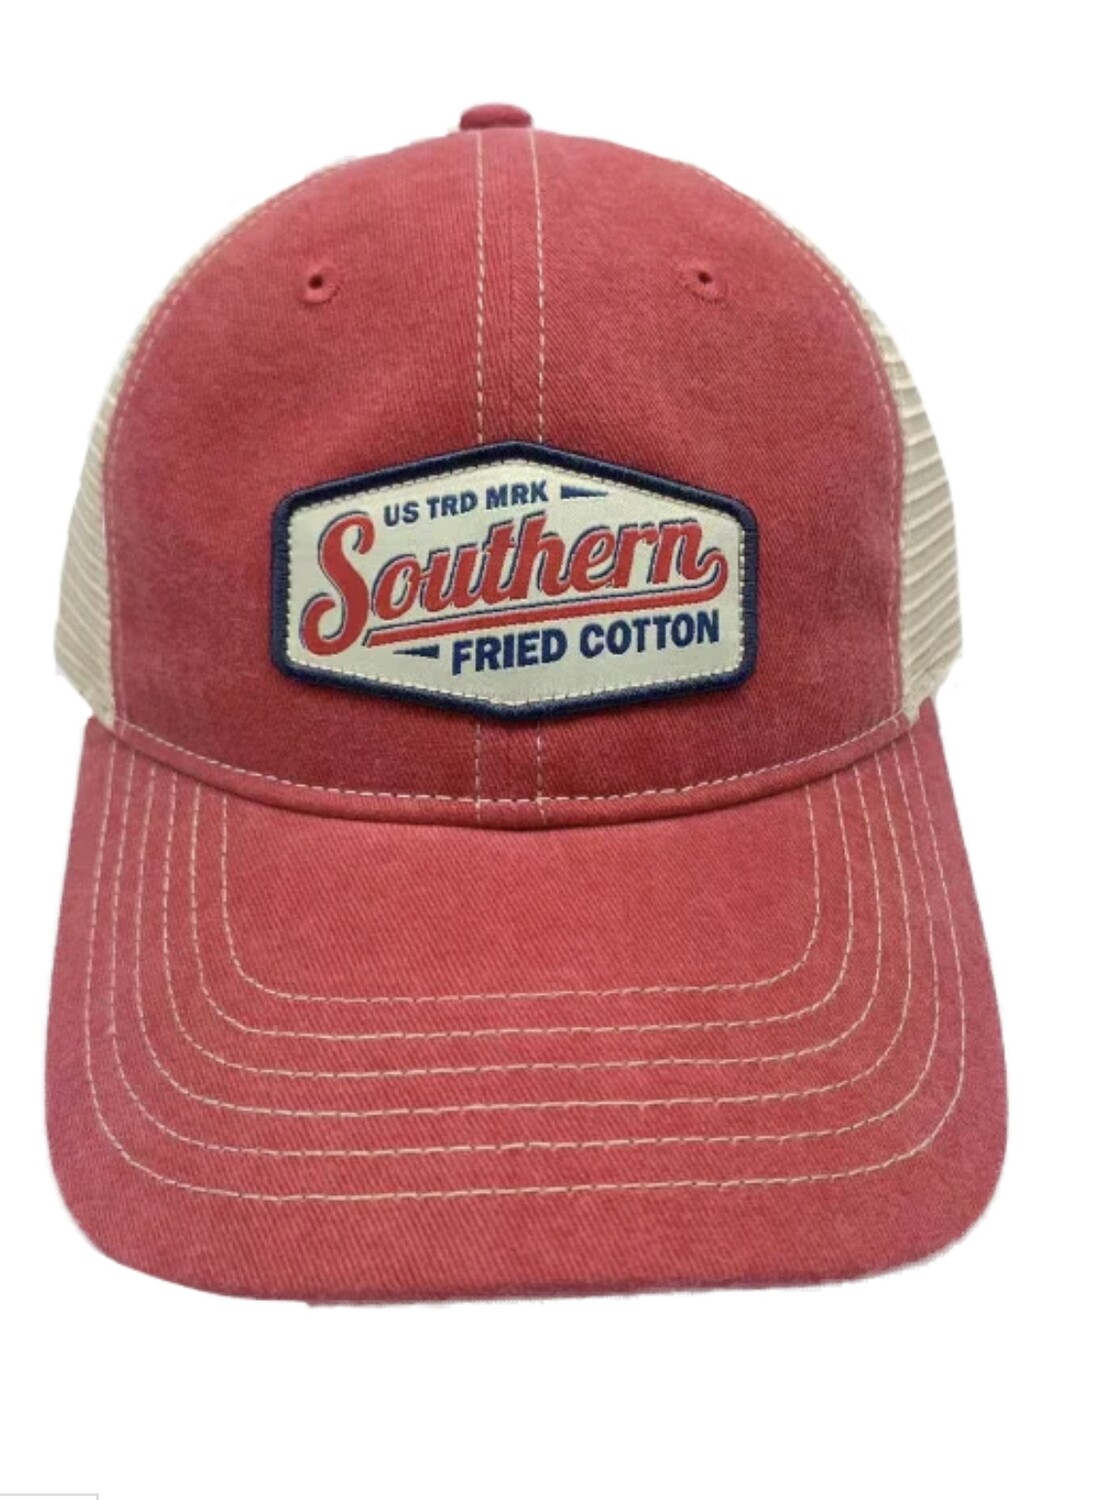 Southern Fried Cotton Hats